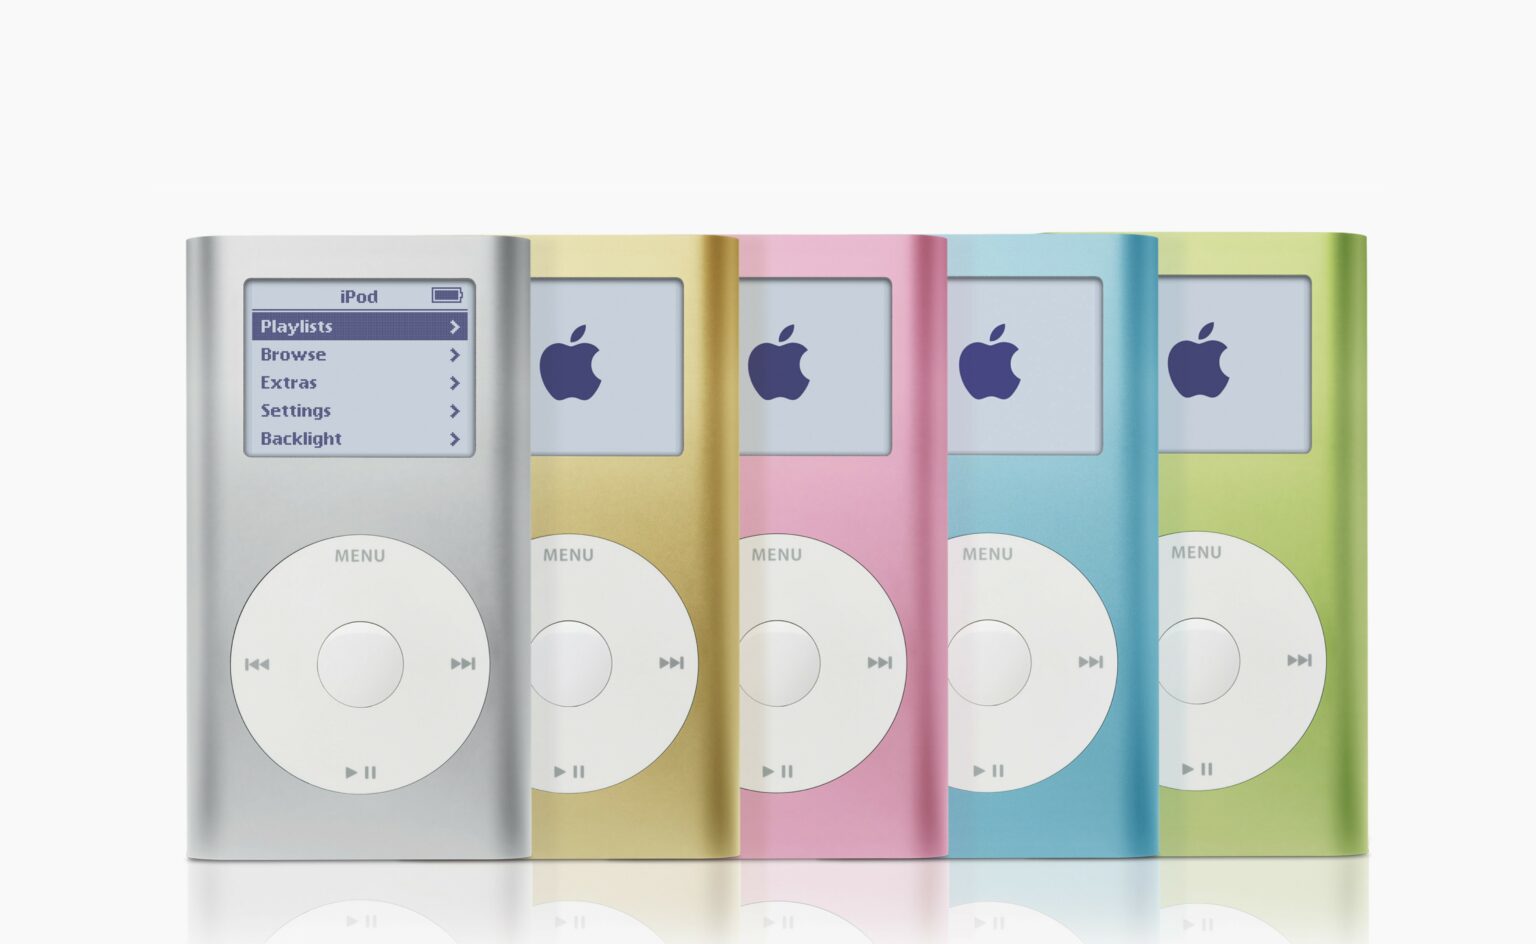 iPod mini launch lineup in 2004: Five small music players in five different colors (silver, gold, pink, blue, and green).